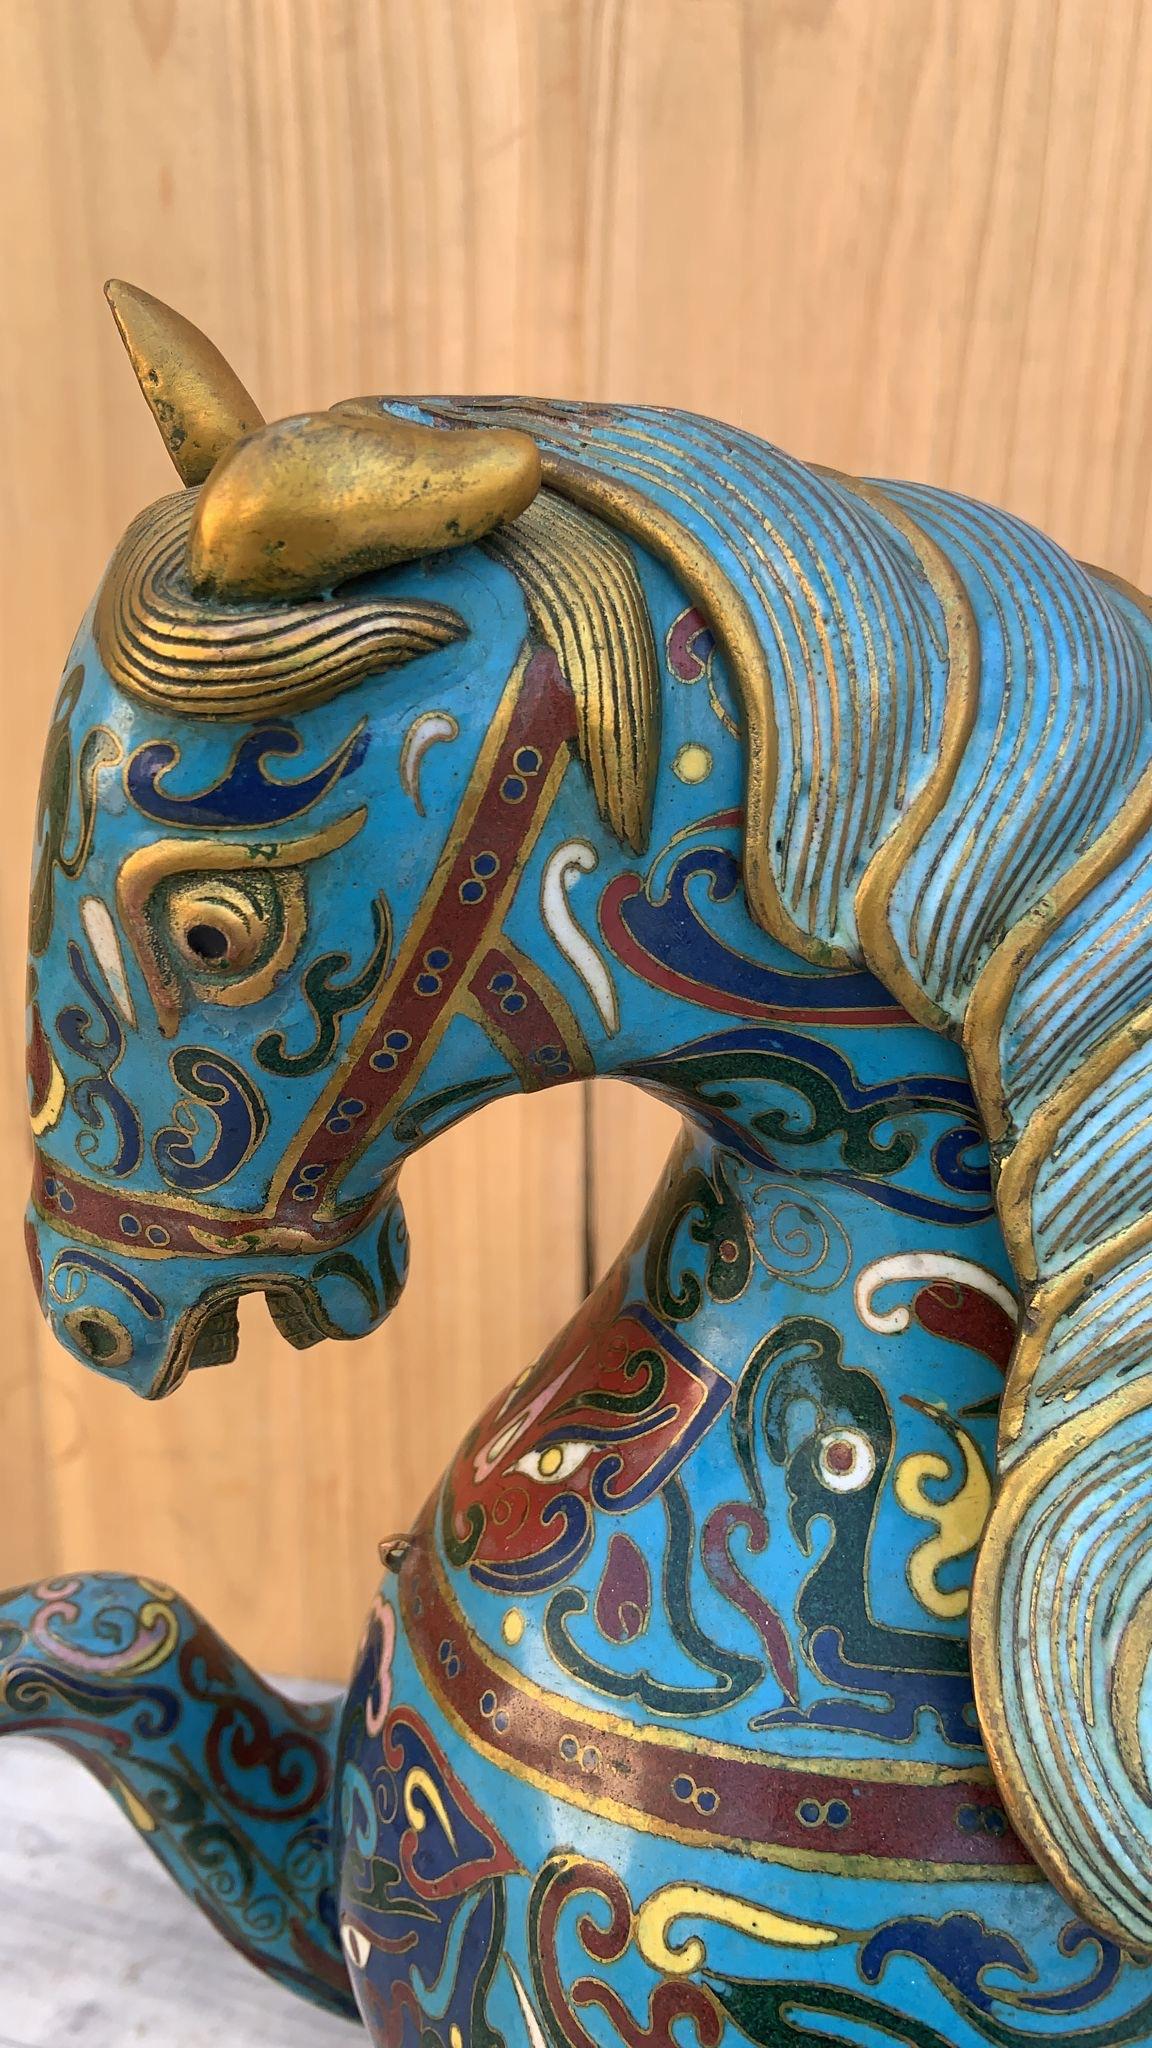 Vintage Chinese Cloisonné War Horse Sculptures on Mahogany Base - Pair For Sale 4